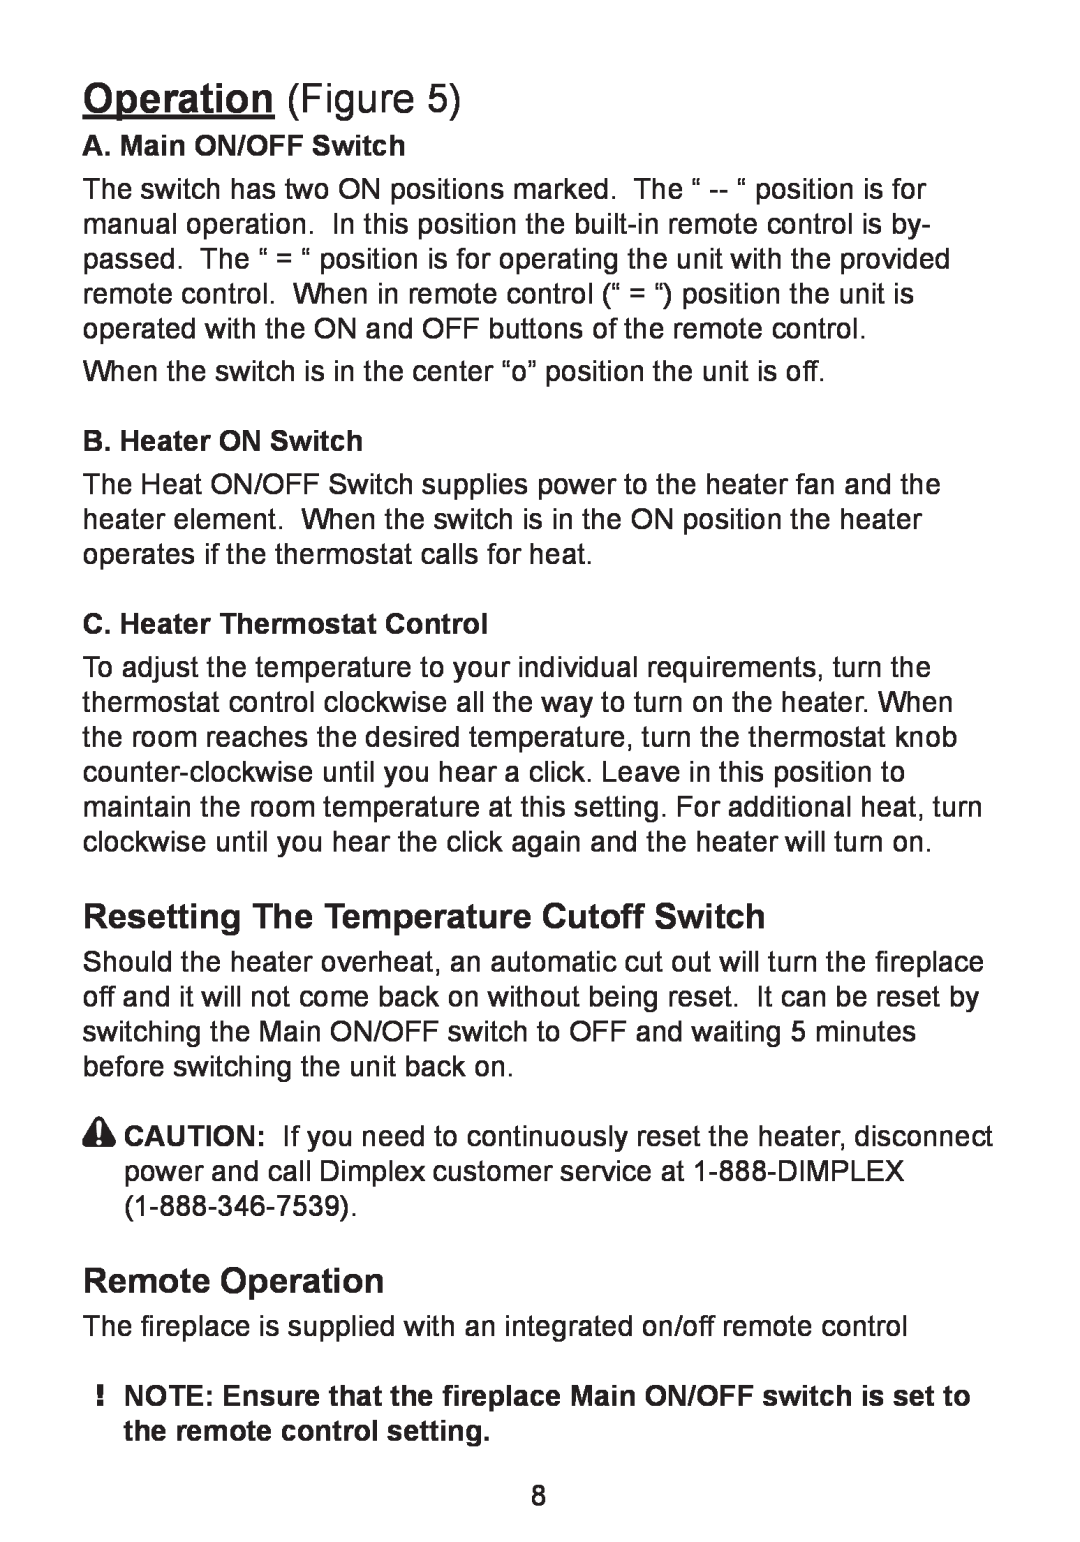 Dimplex DF2426SS Resetting The Temperature Cutoff Switch, Remote Operation, A. Main ON/OFF Switch, B. Heater ON Switch 